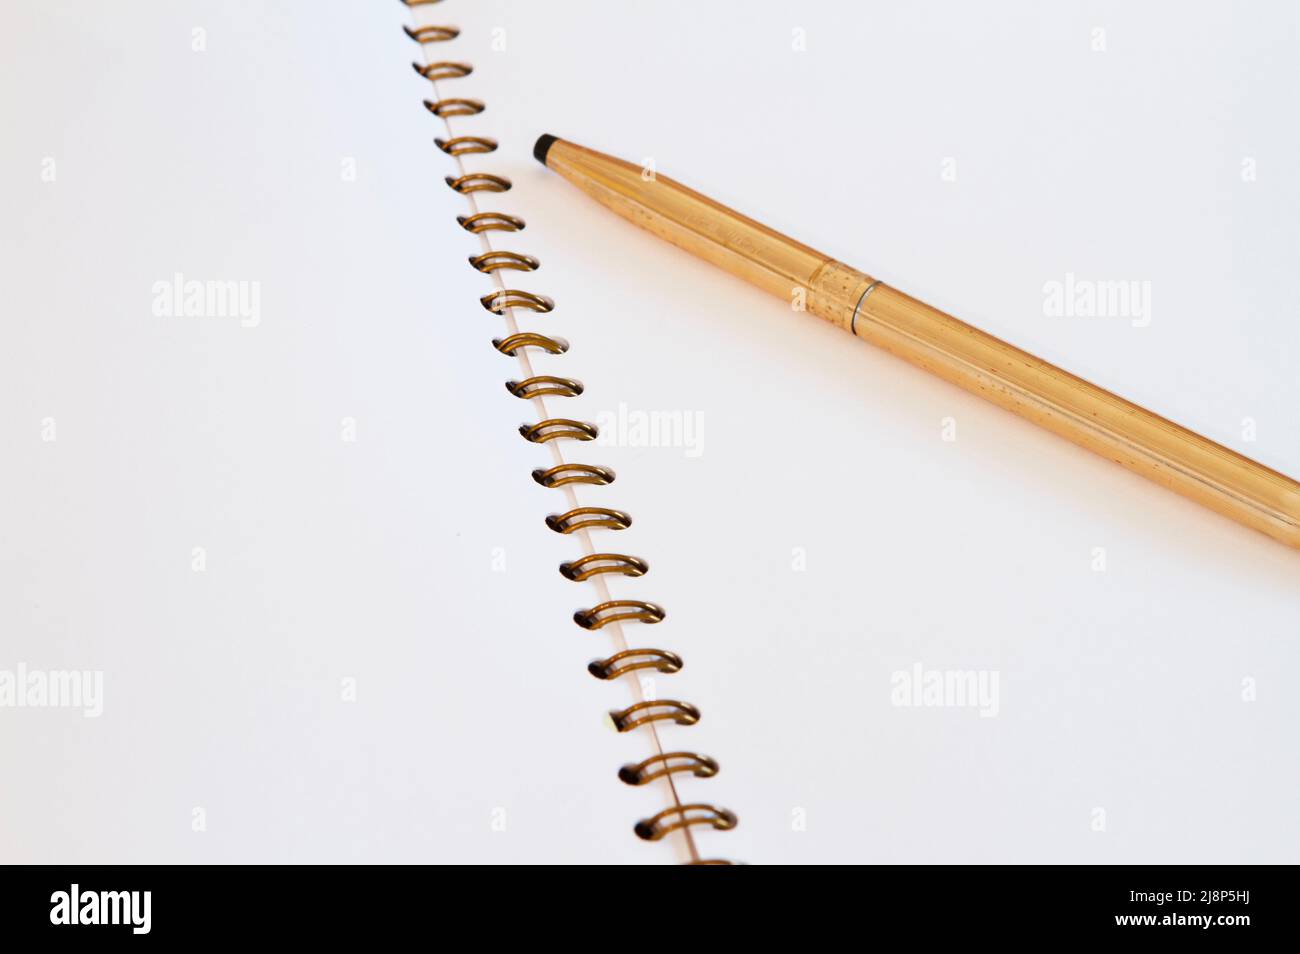 Gold pen on blank page of spiral-bound journal. Stock Photo